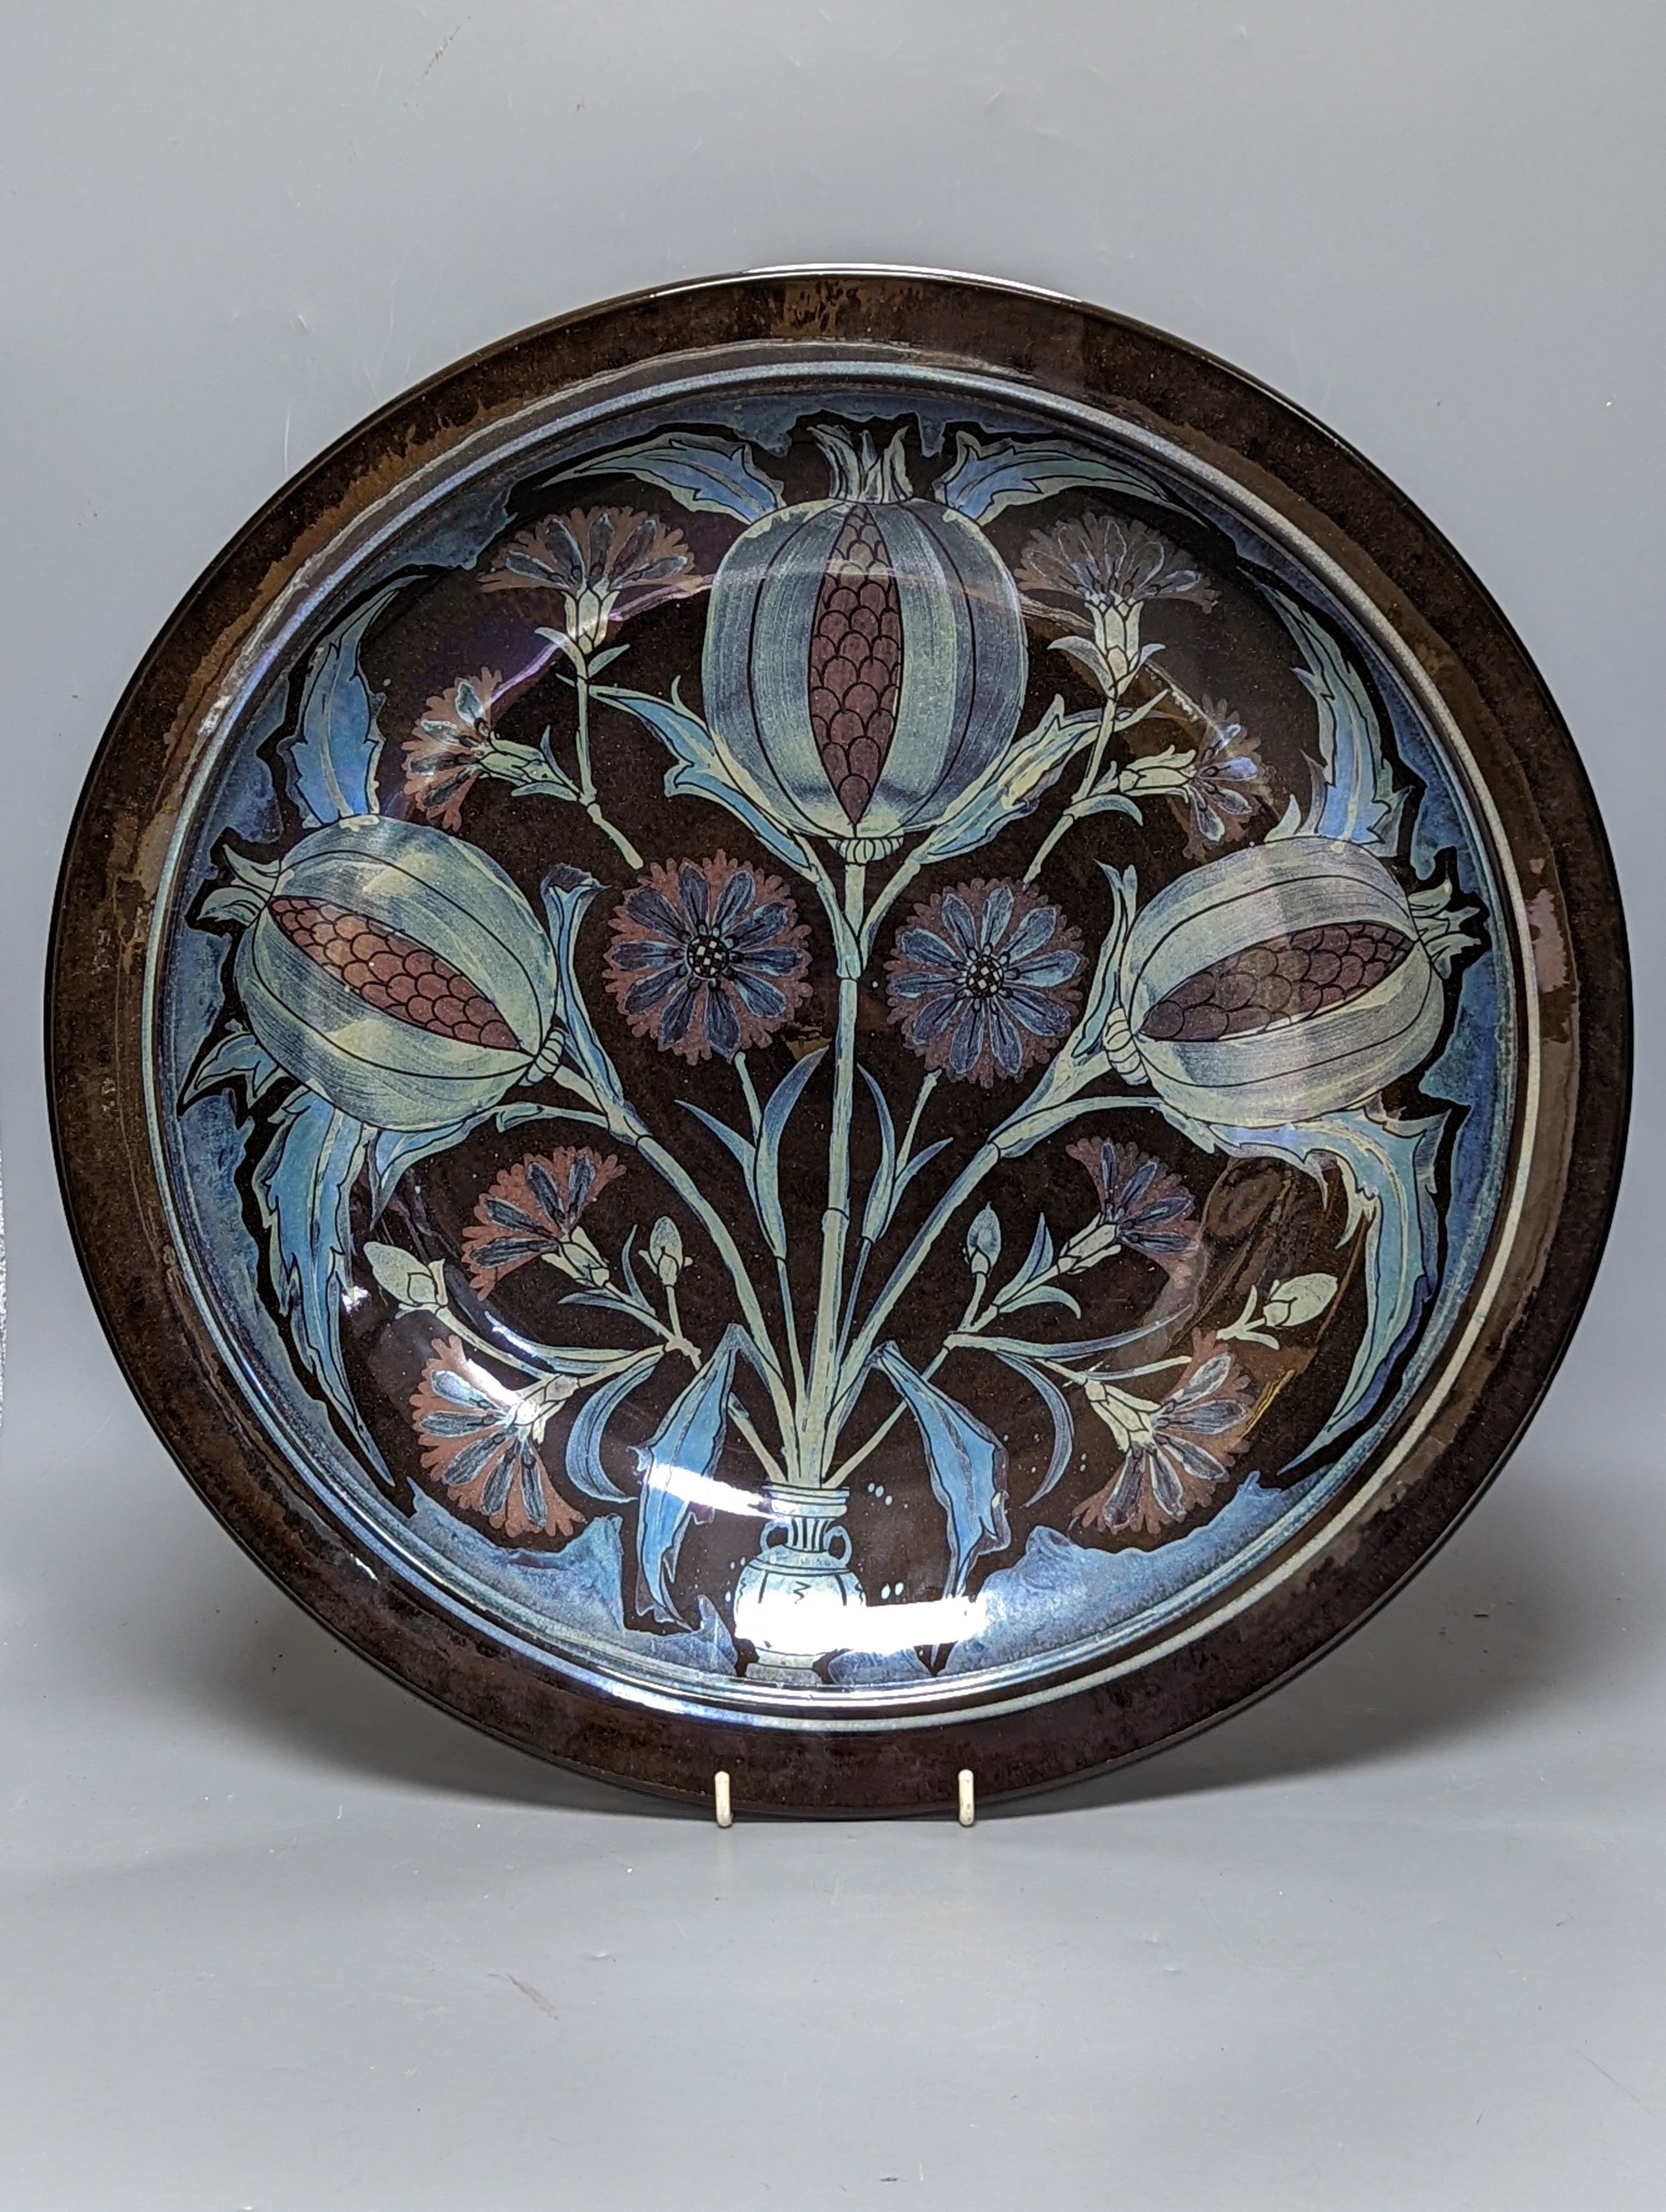 Jonathan Chiswell-Jones. A pomegranate pattern reduction fired lustre charger, numbered 4232, diameter 44cm